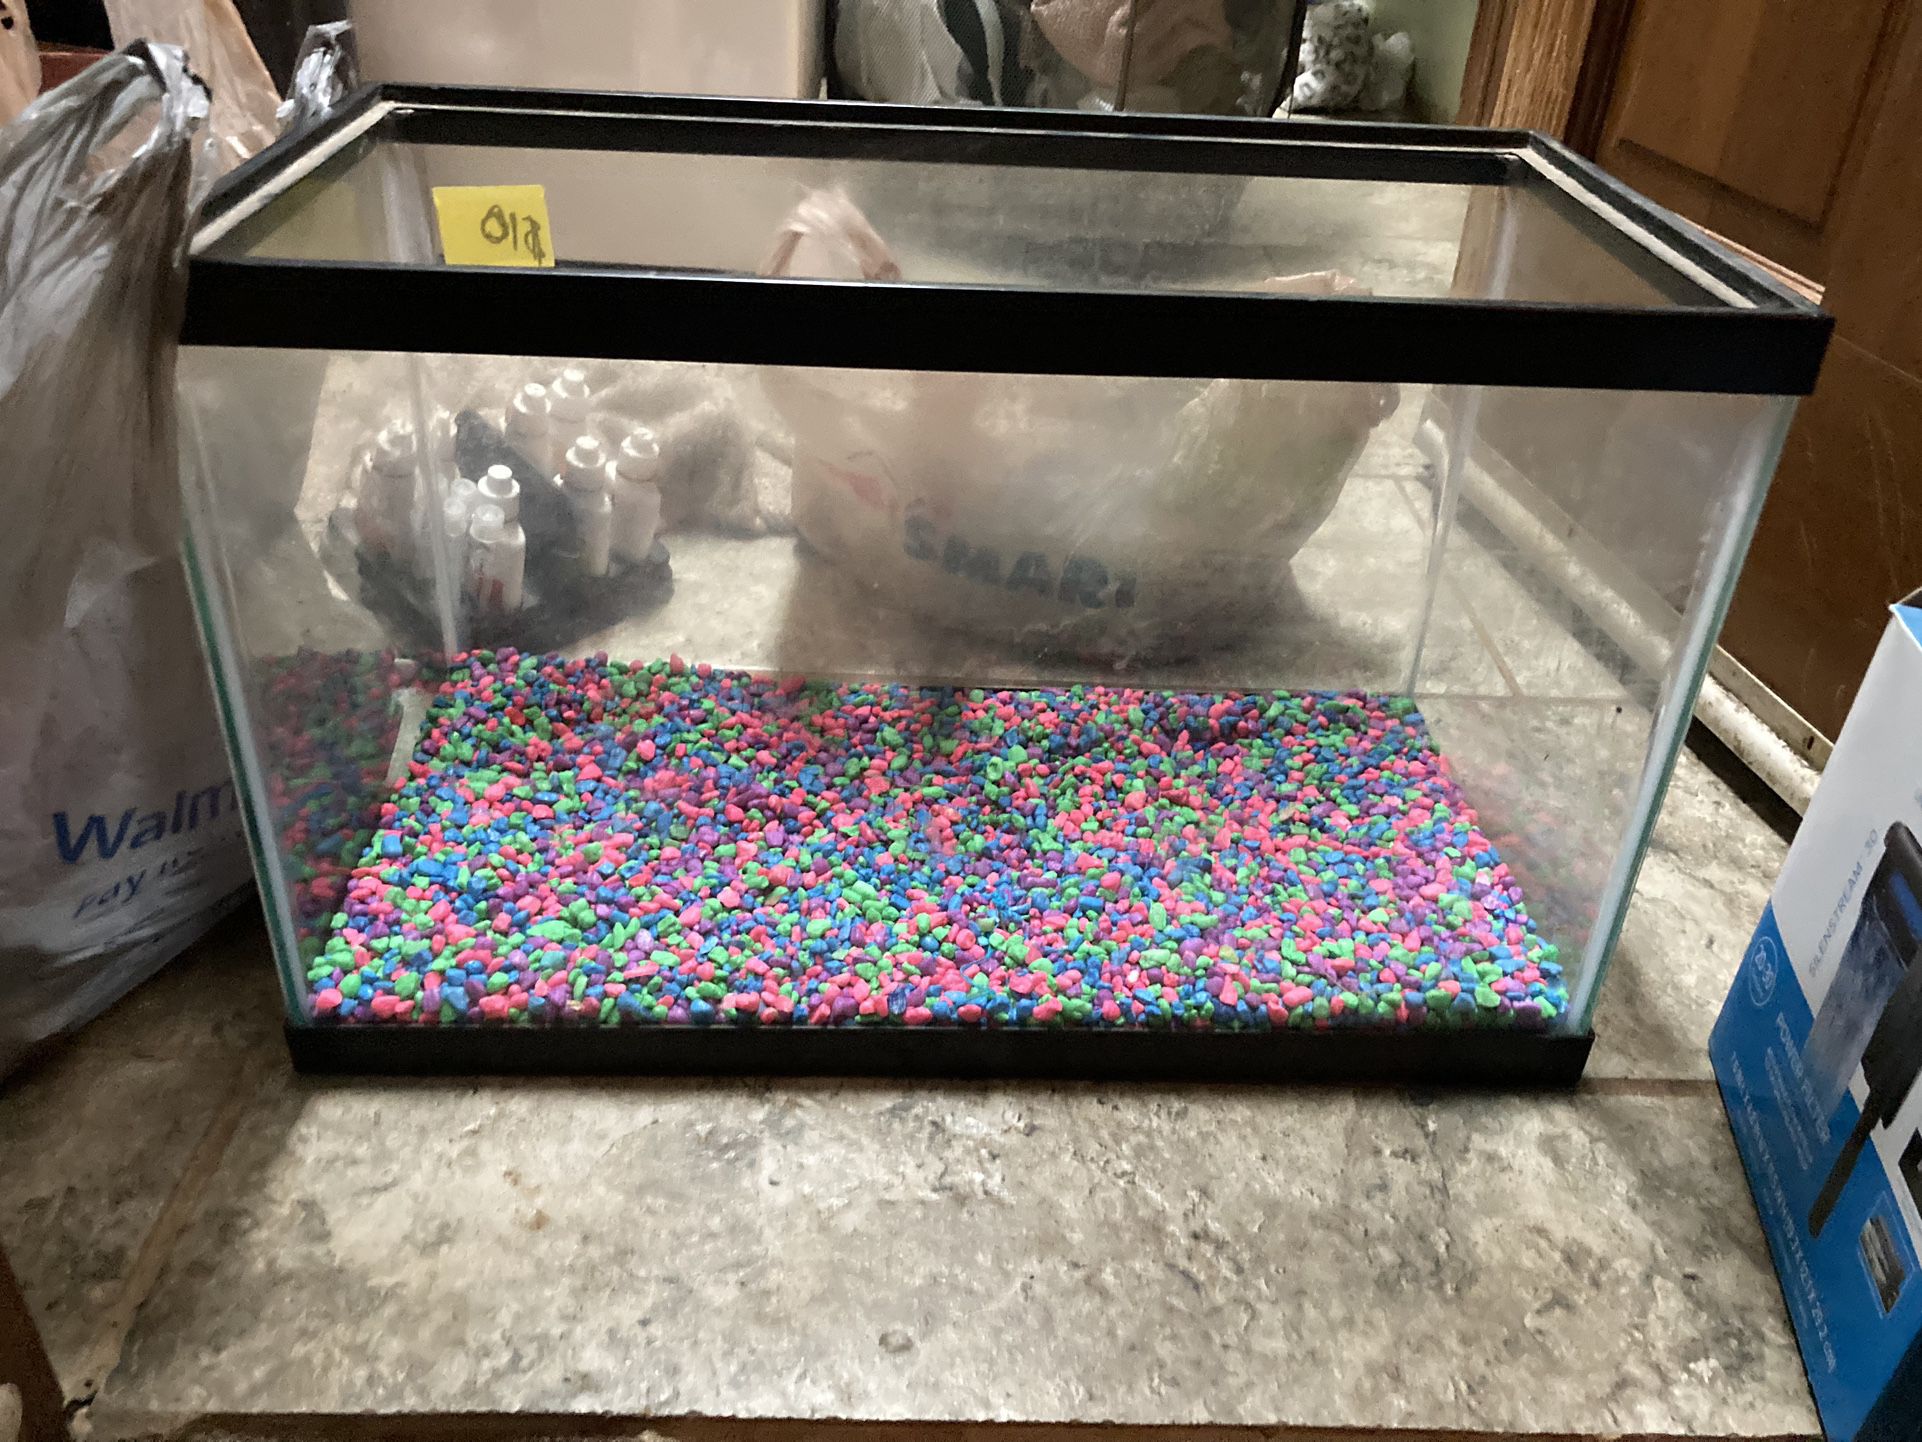 Fish Tank And Accessories 